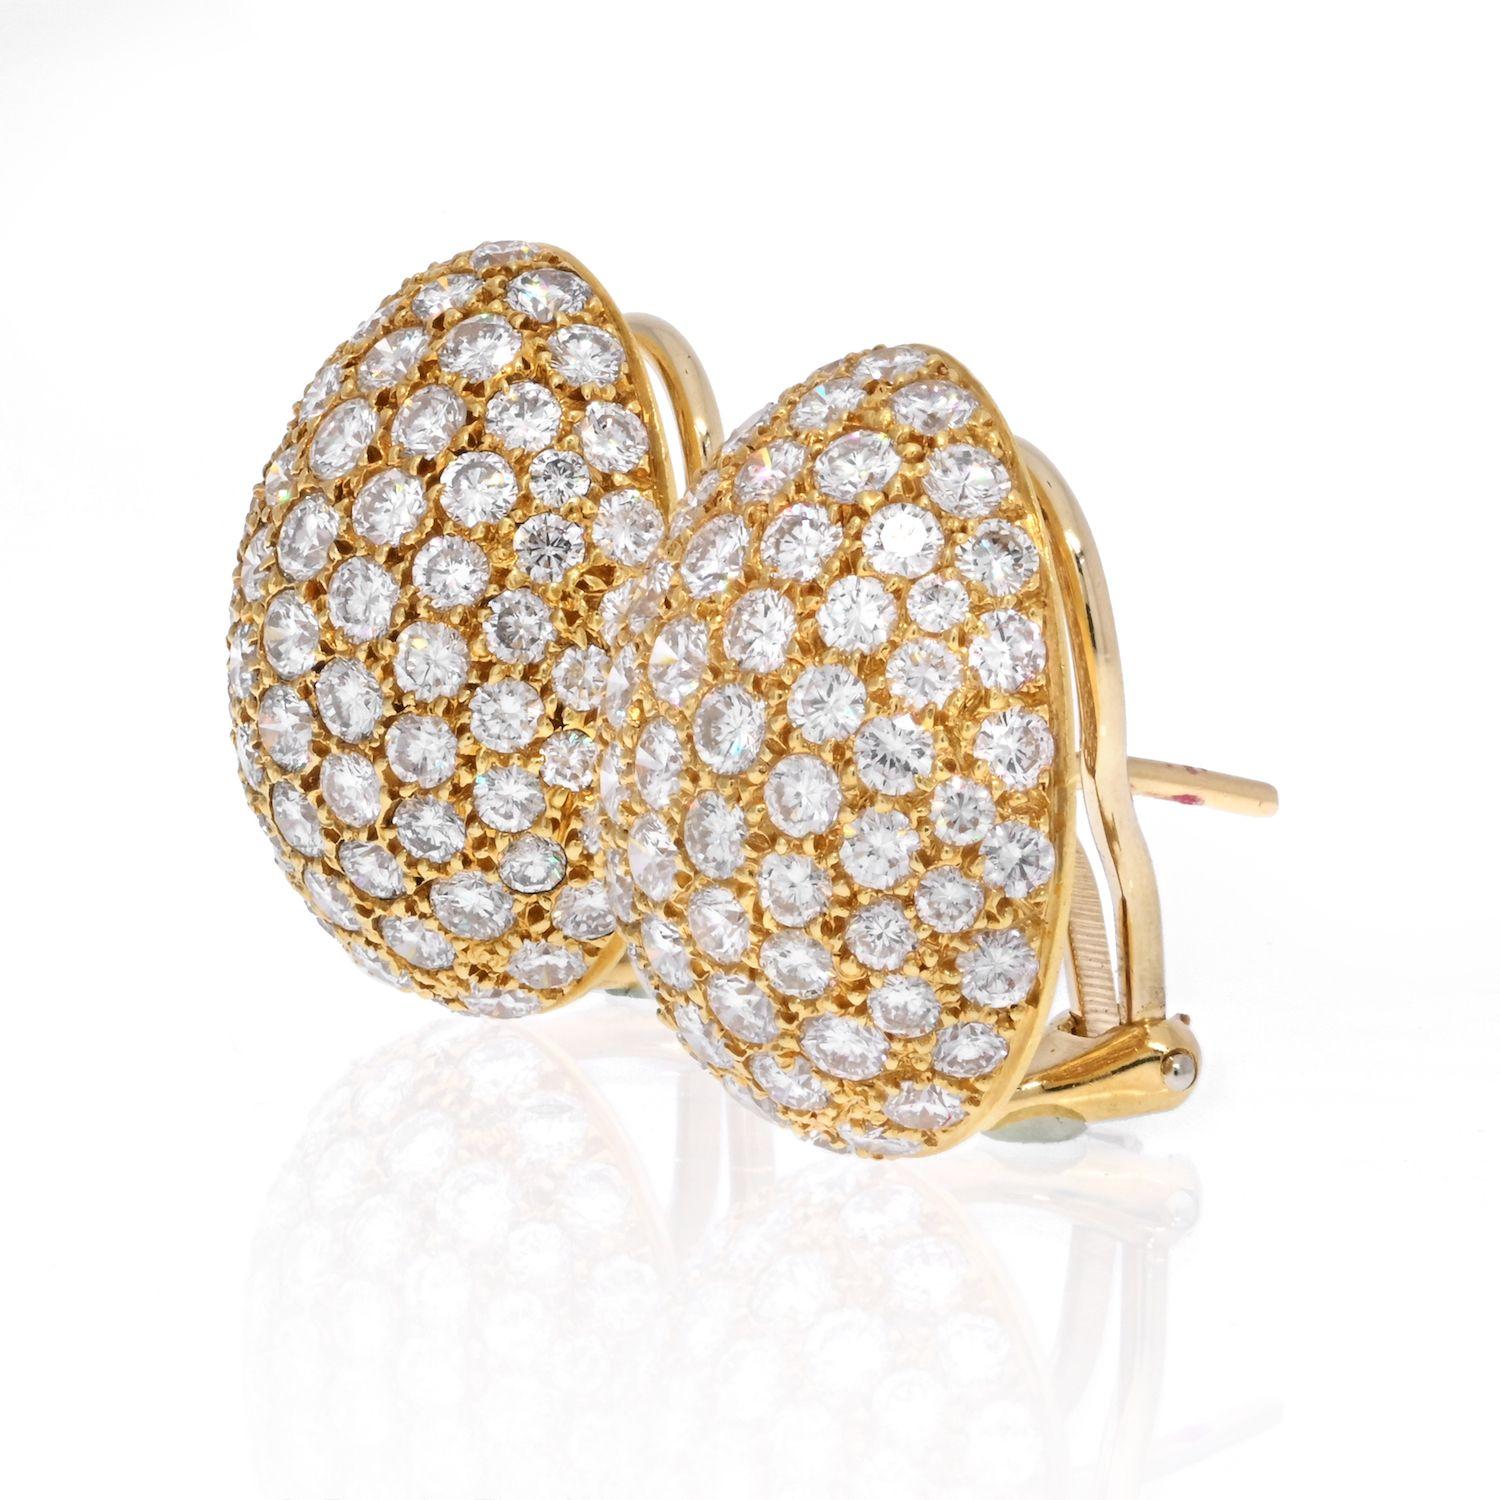 A pair of cluster pave set diamond earrings by Van Cleef & Arpels. Each oval cluster set throughout with brilliant-cut diamonds, omega with posts fittings, signed Van Cleef & Arpels NY, numbered.

Diamond Carat Weight: 5.50cttw (approx.)
Diamodn